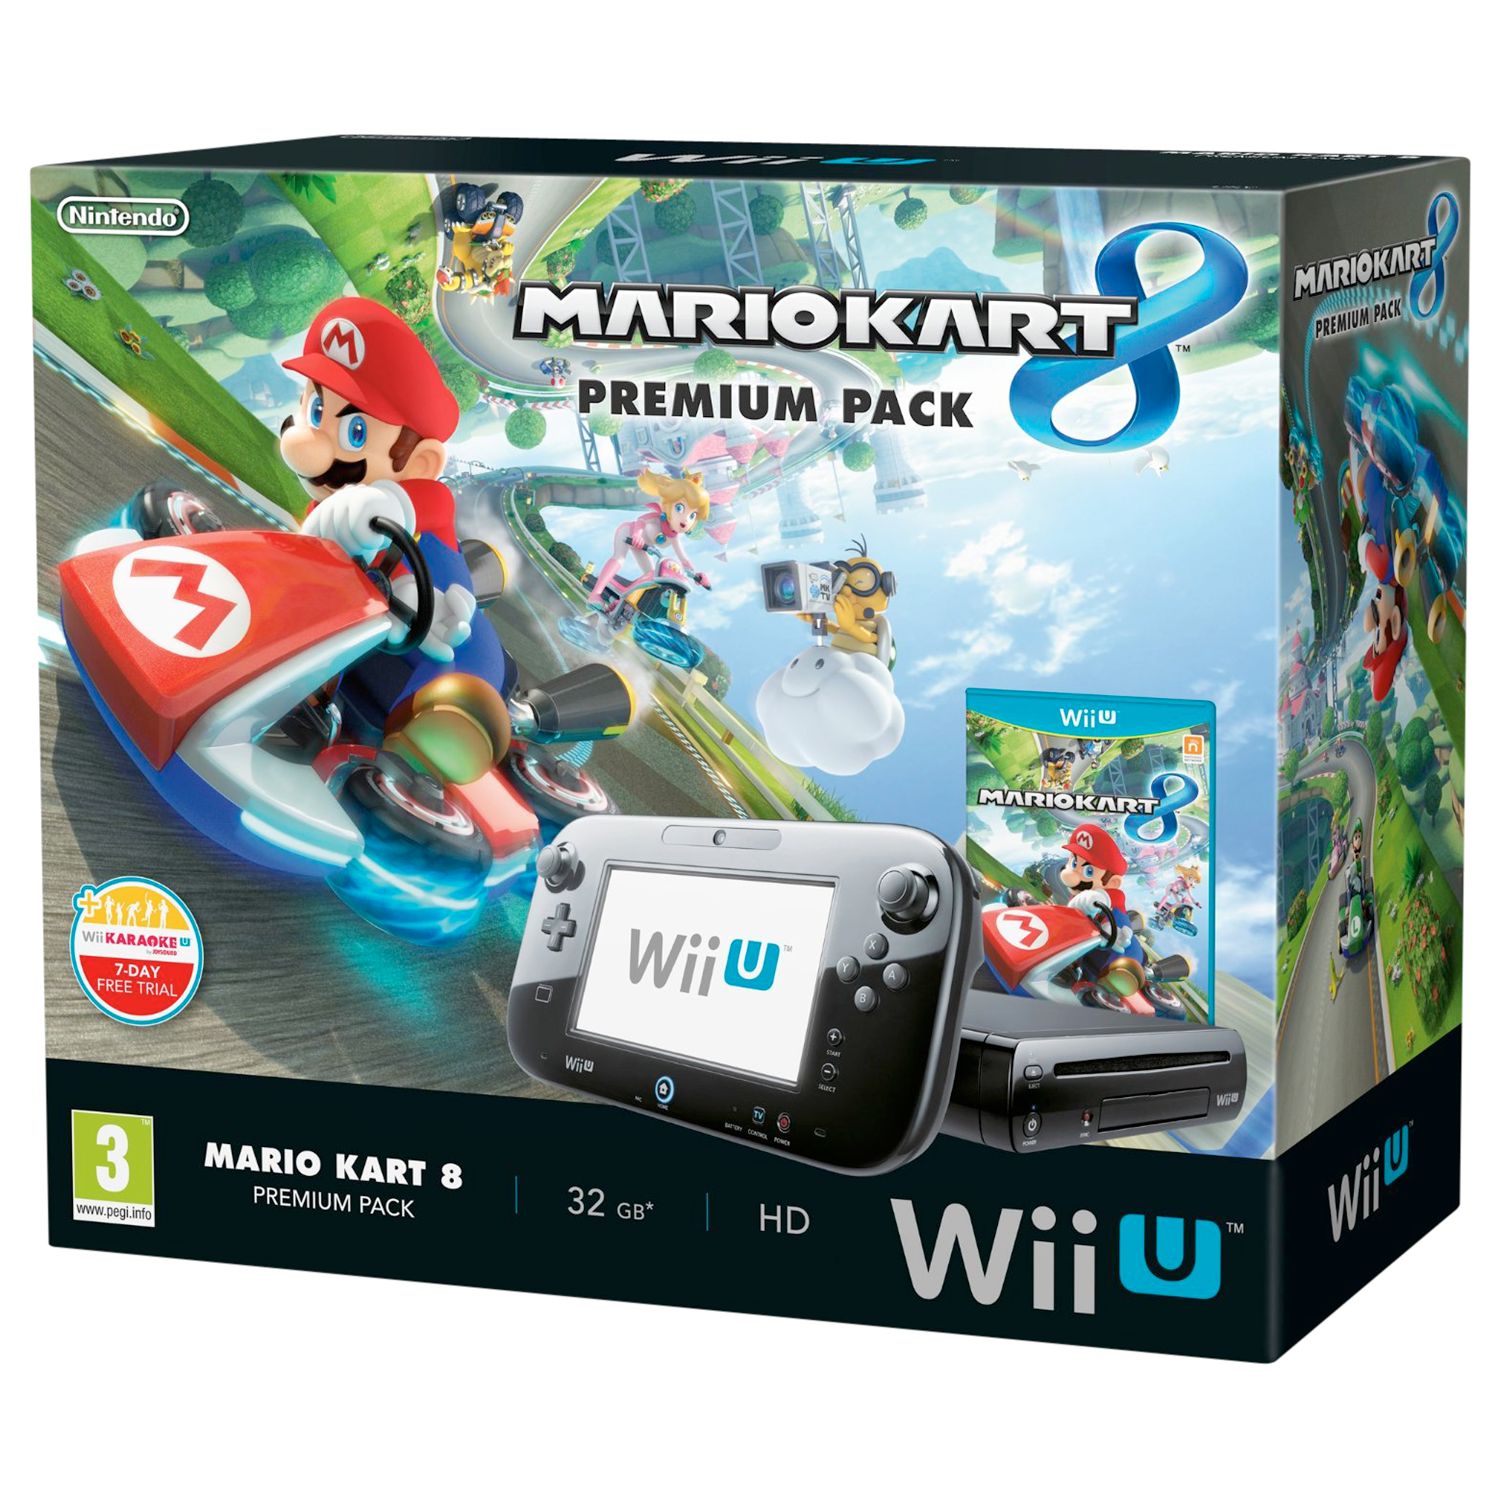 mario kart 8 for the wii